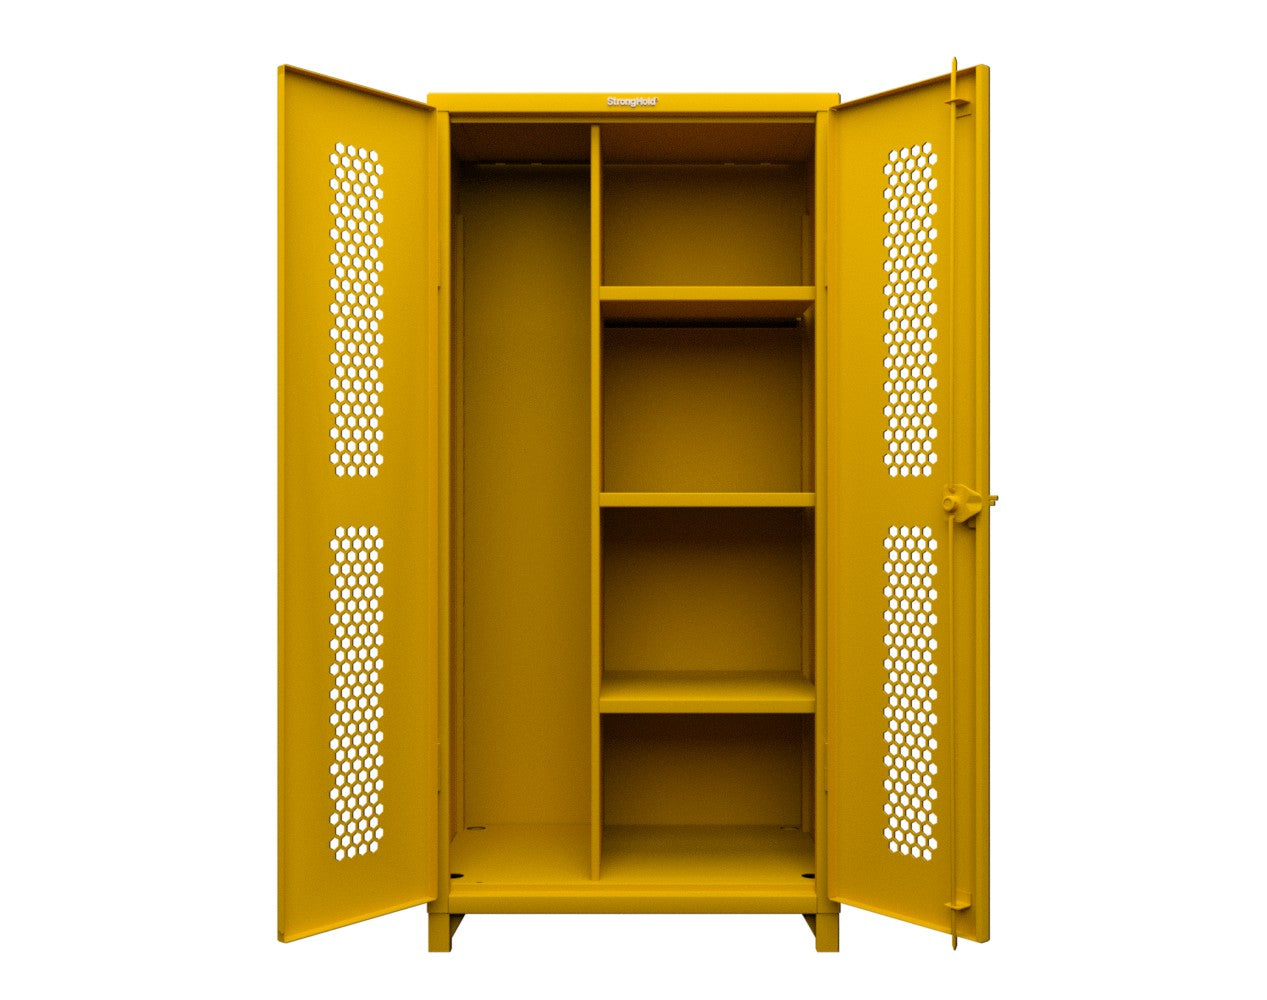 Extra Heavy Duty 14 GA Ventilated (Hex) Janitorial Cabinet with 3 Shelves - 36 In. W x 24 In. D x 75 In. H